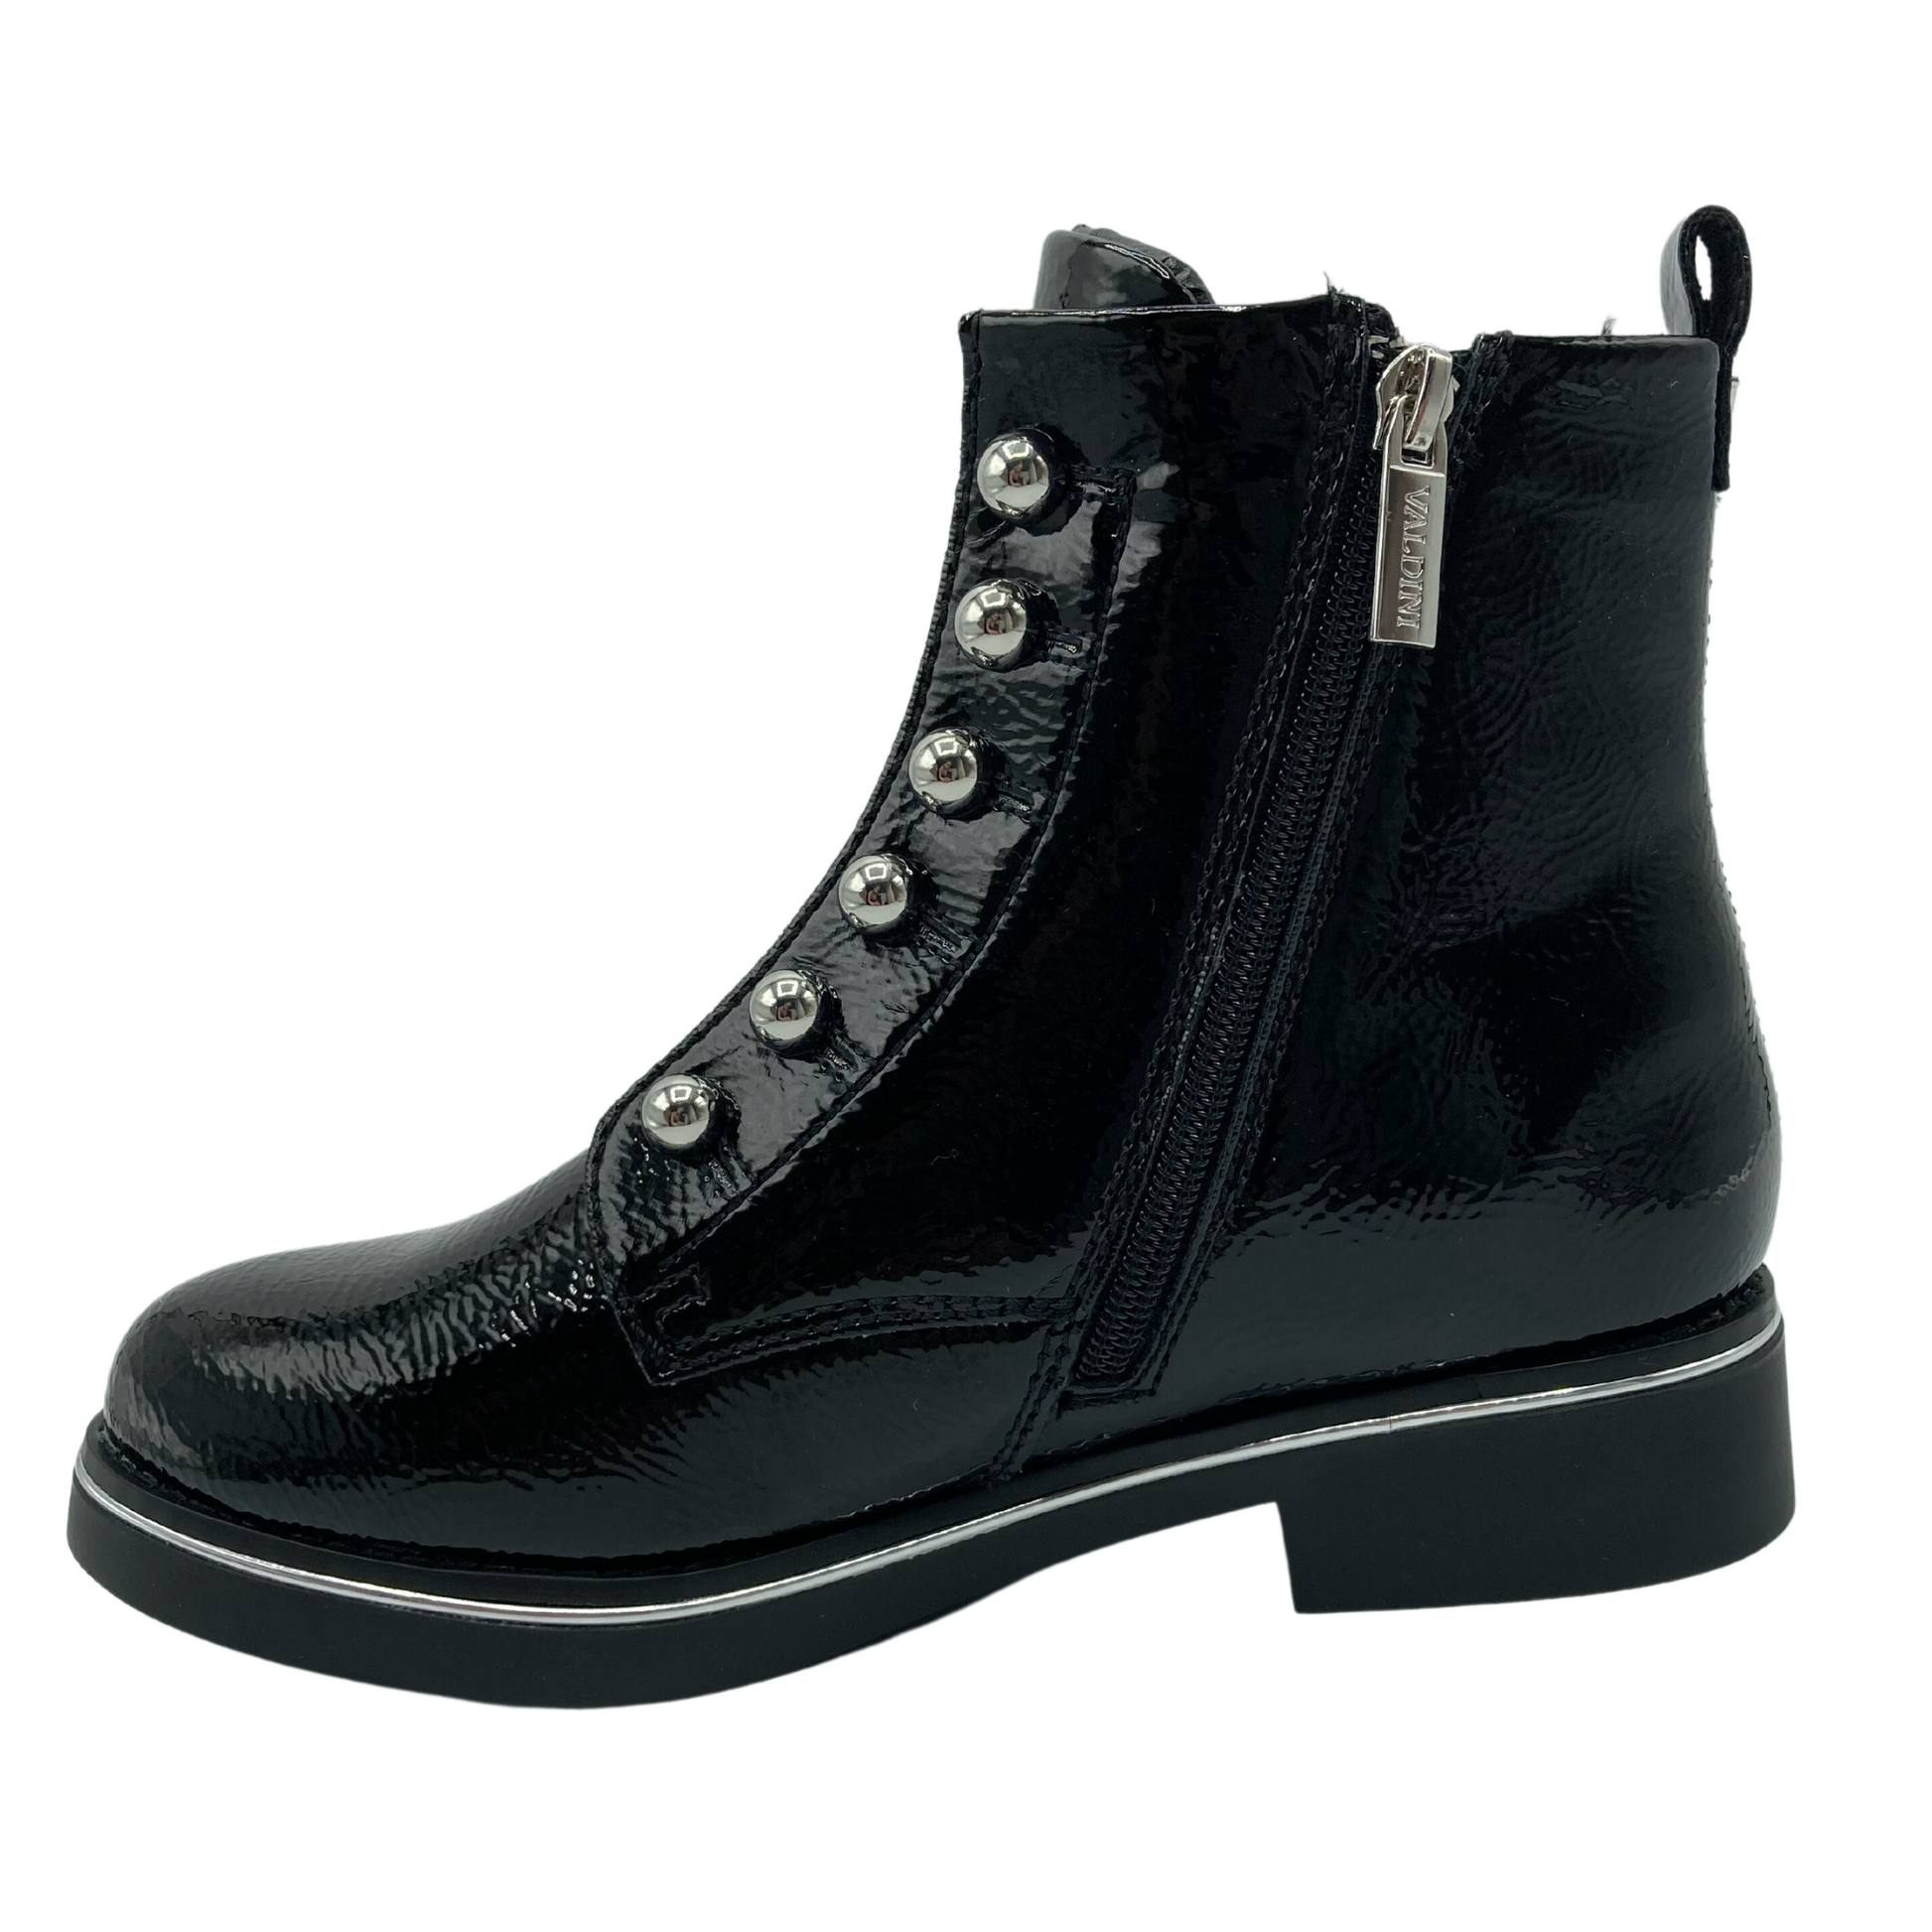 Left facing view of black patent short boot with side zipper closure, short block heel and pearl detail